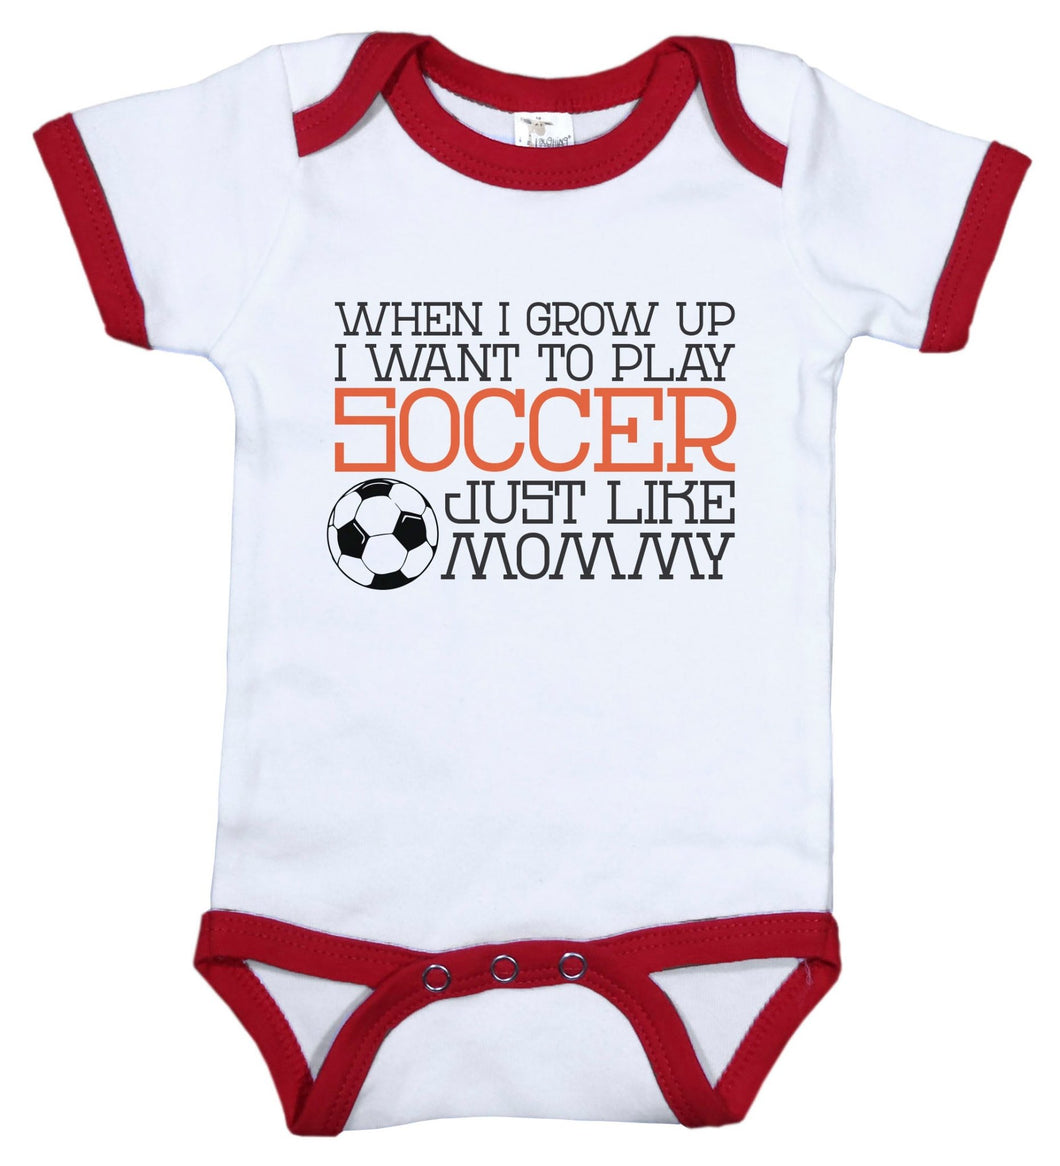 When I Grow Up I Want To Play Soccer Just Like Mommy / Soccer Ringer Onesie - Baffle